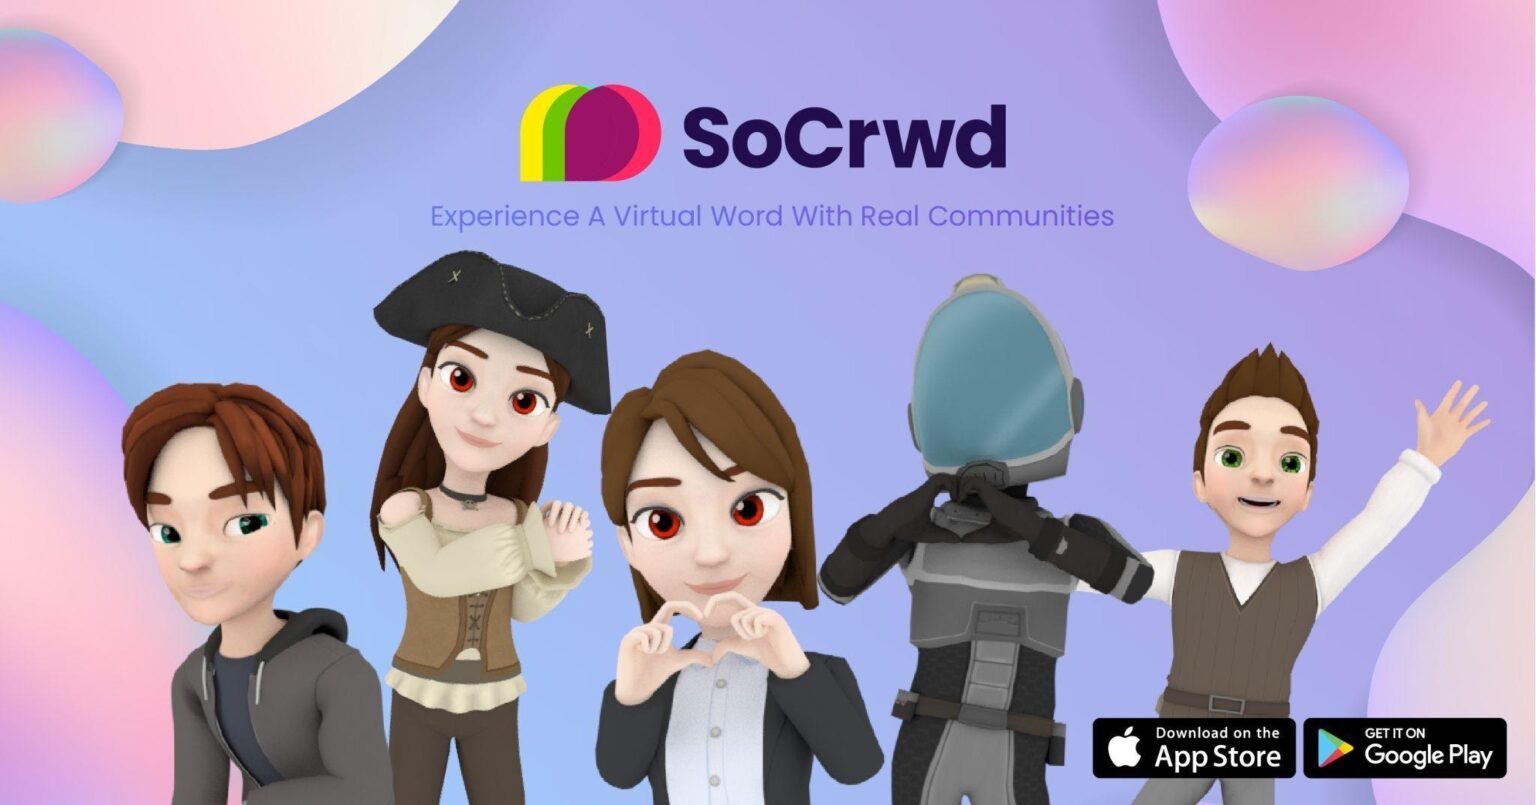 SoCrwd, Bringing The Best of the Offline World To The Comfort Of Your Own Home